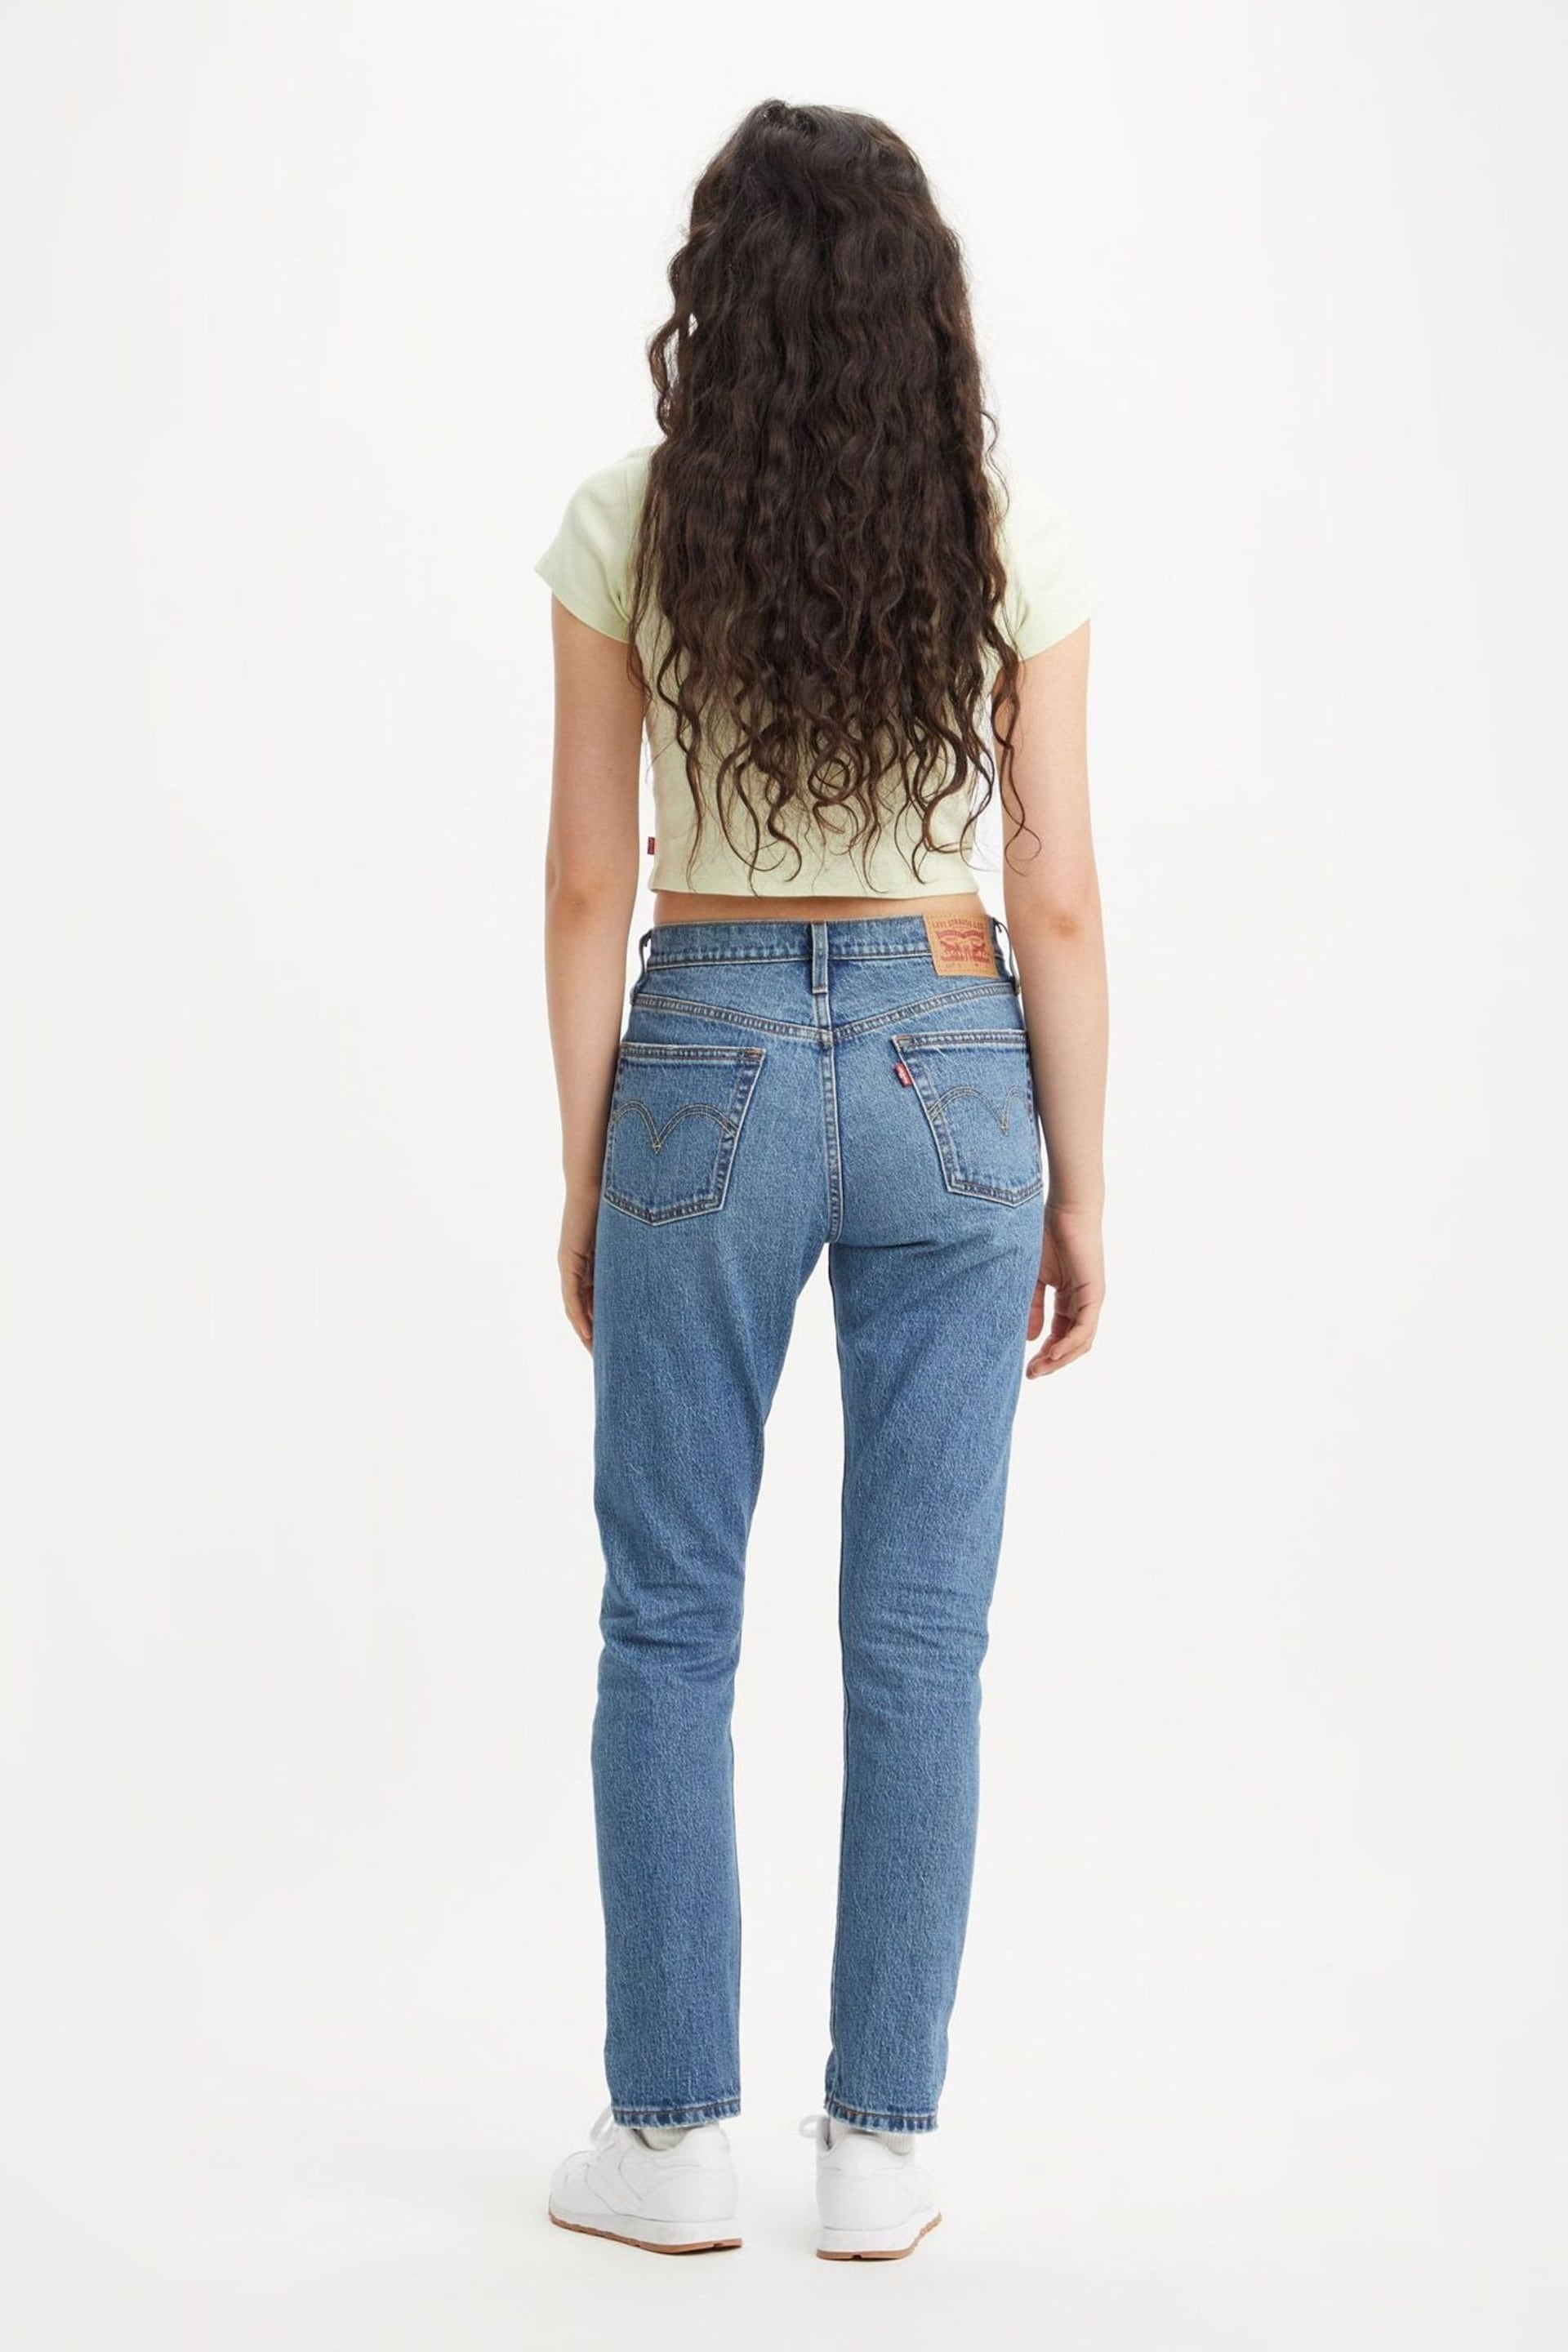 Levi's® Blue Its True Light Wash Blue 501® Youth Skinny Jeans - Image 3 of 8